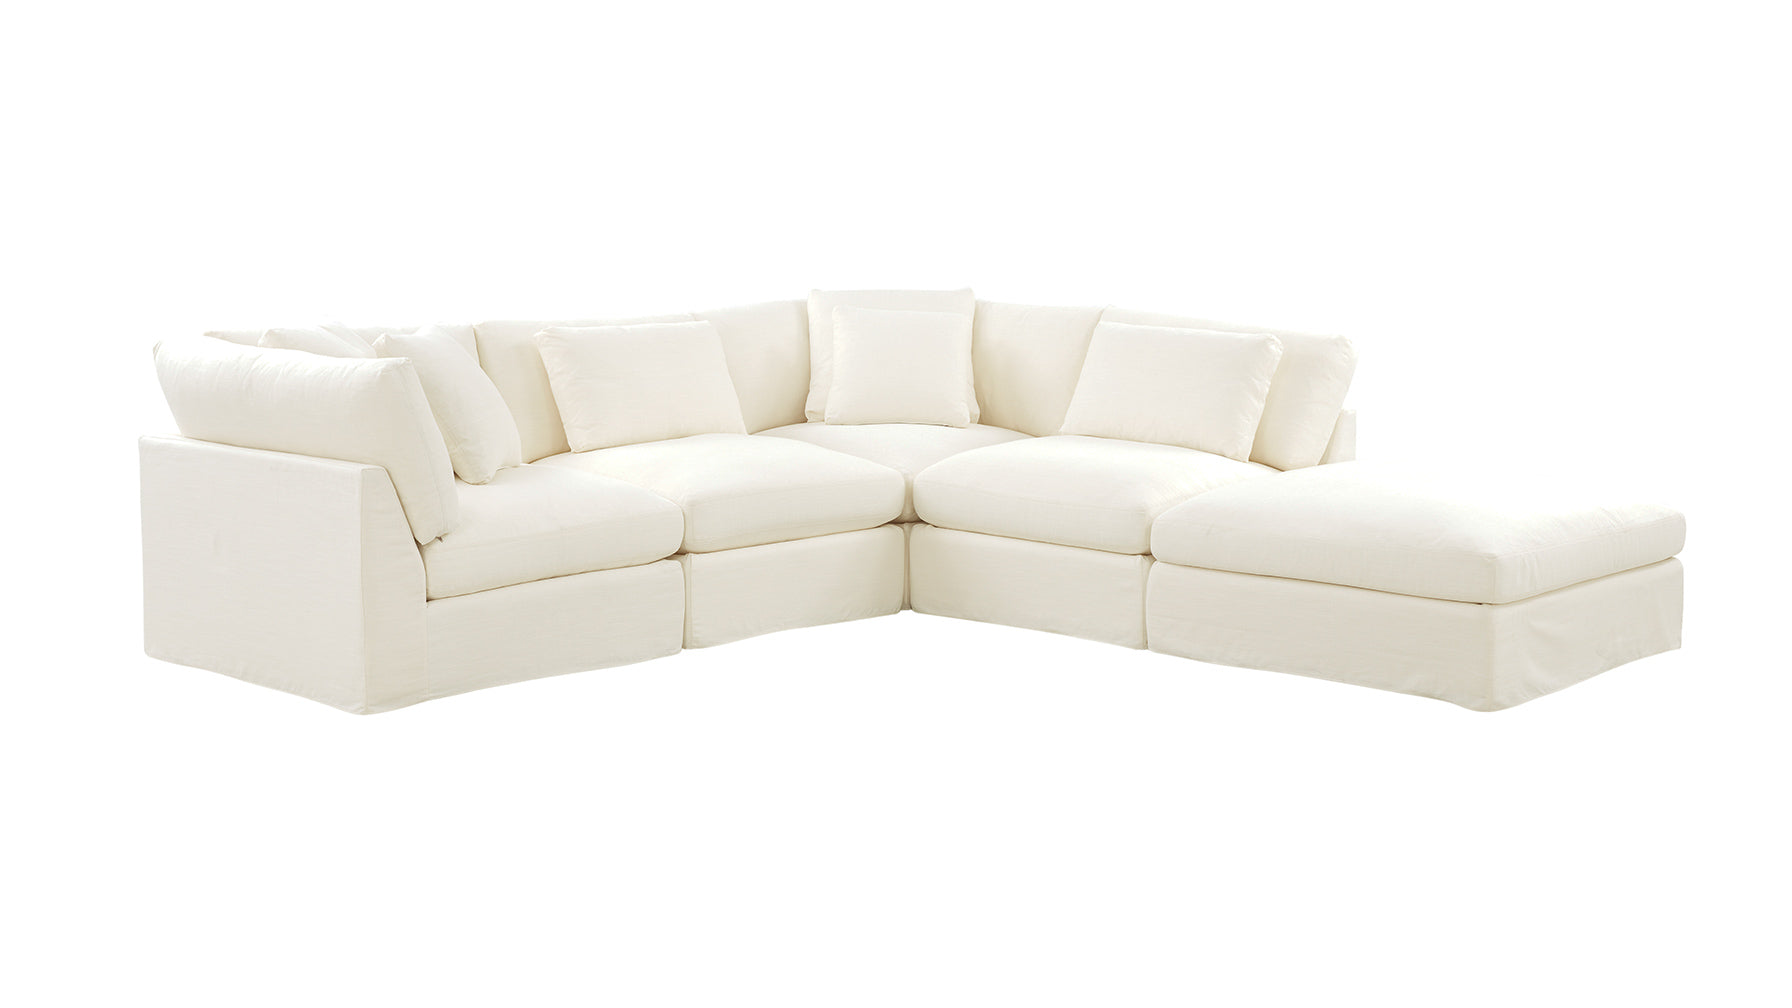 Get Together™ 5-Piece Modular Sectional, Large, Cream Linen - Image 2